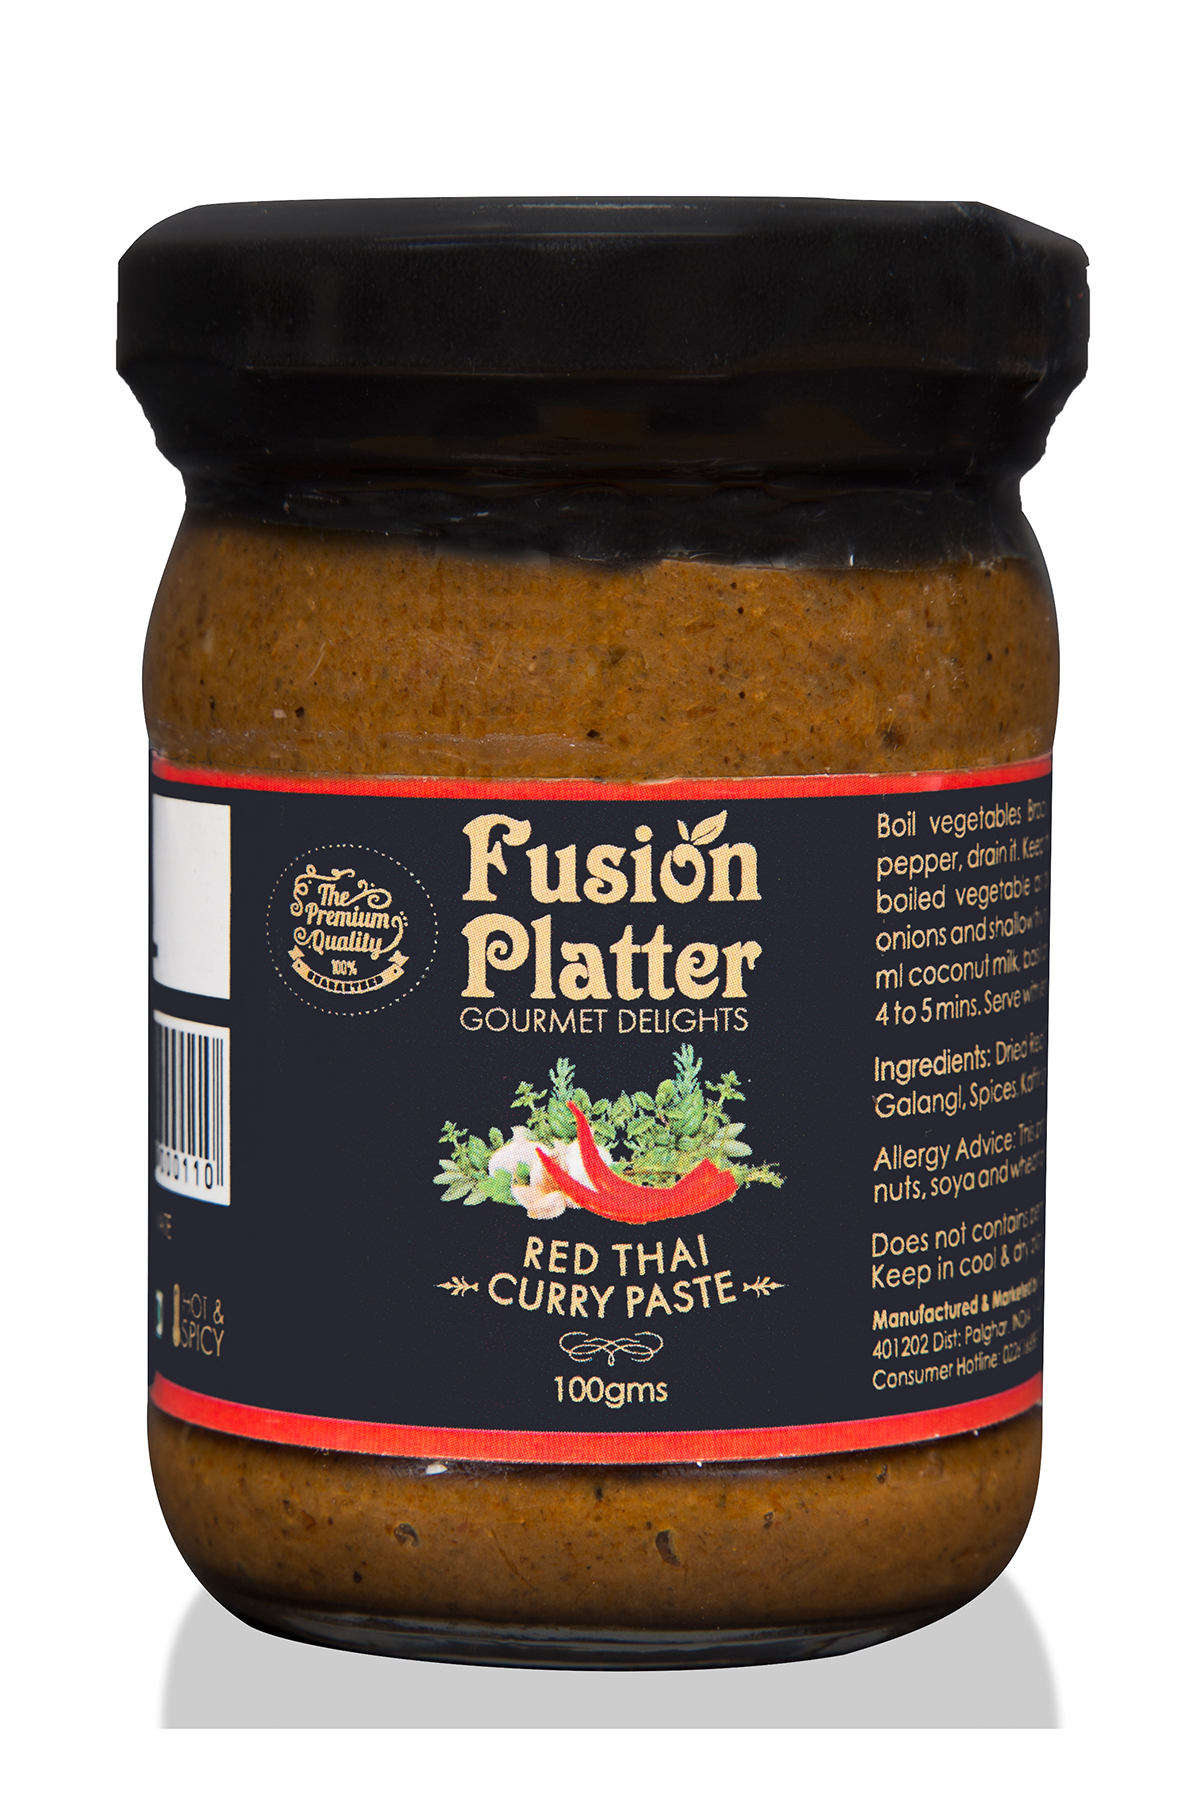 best thai red curry paste